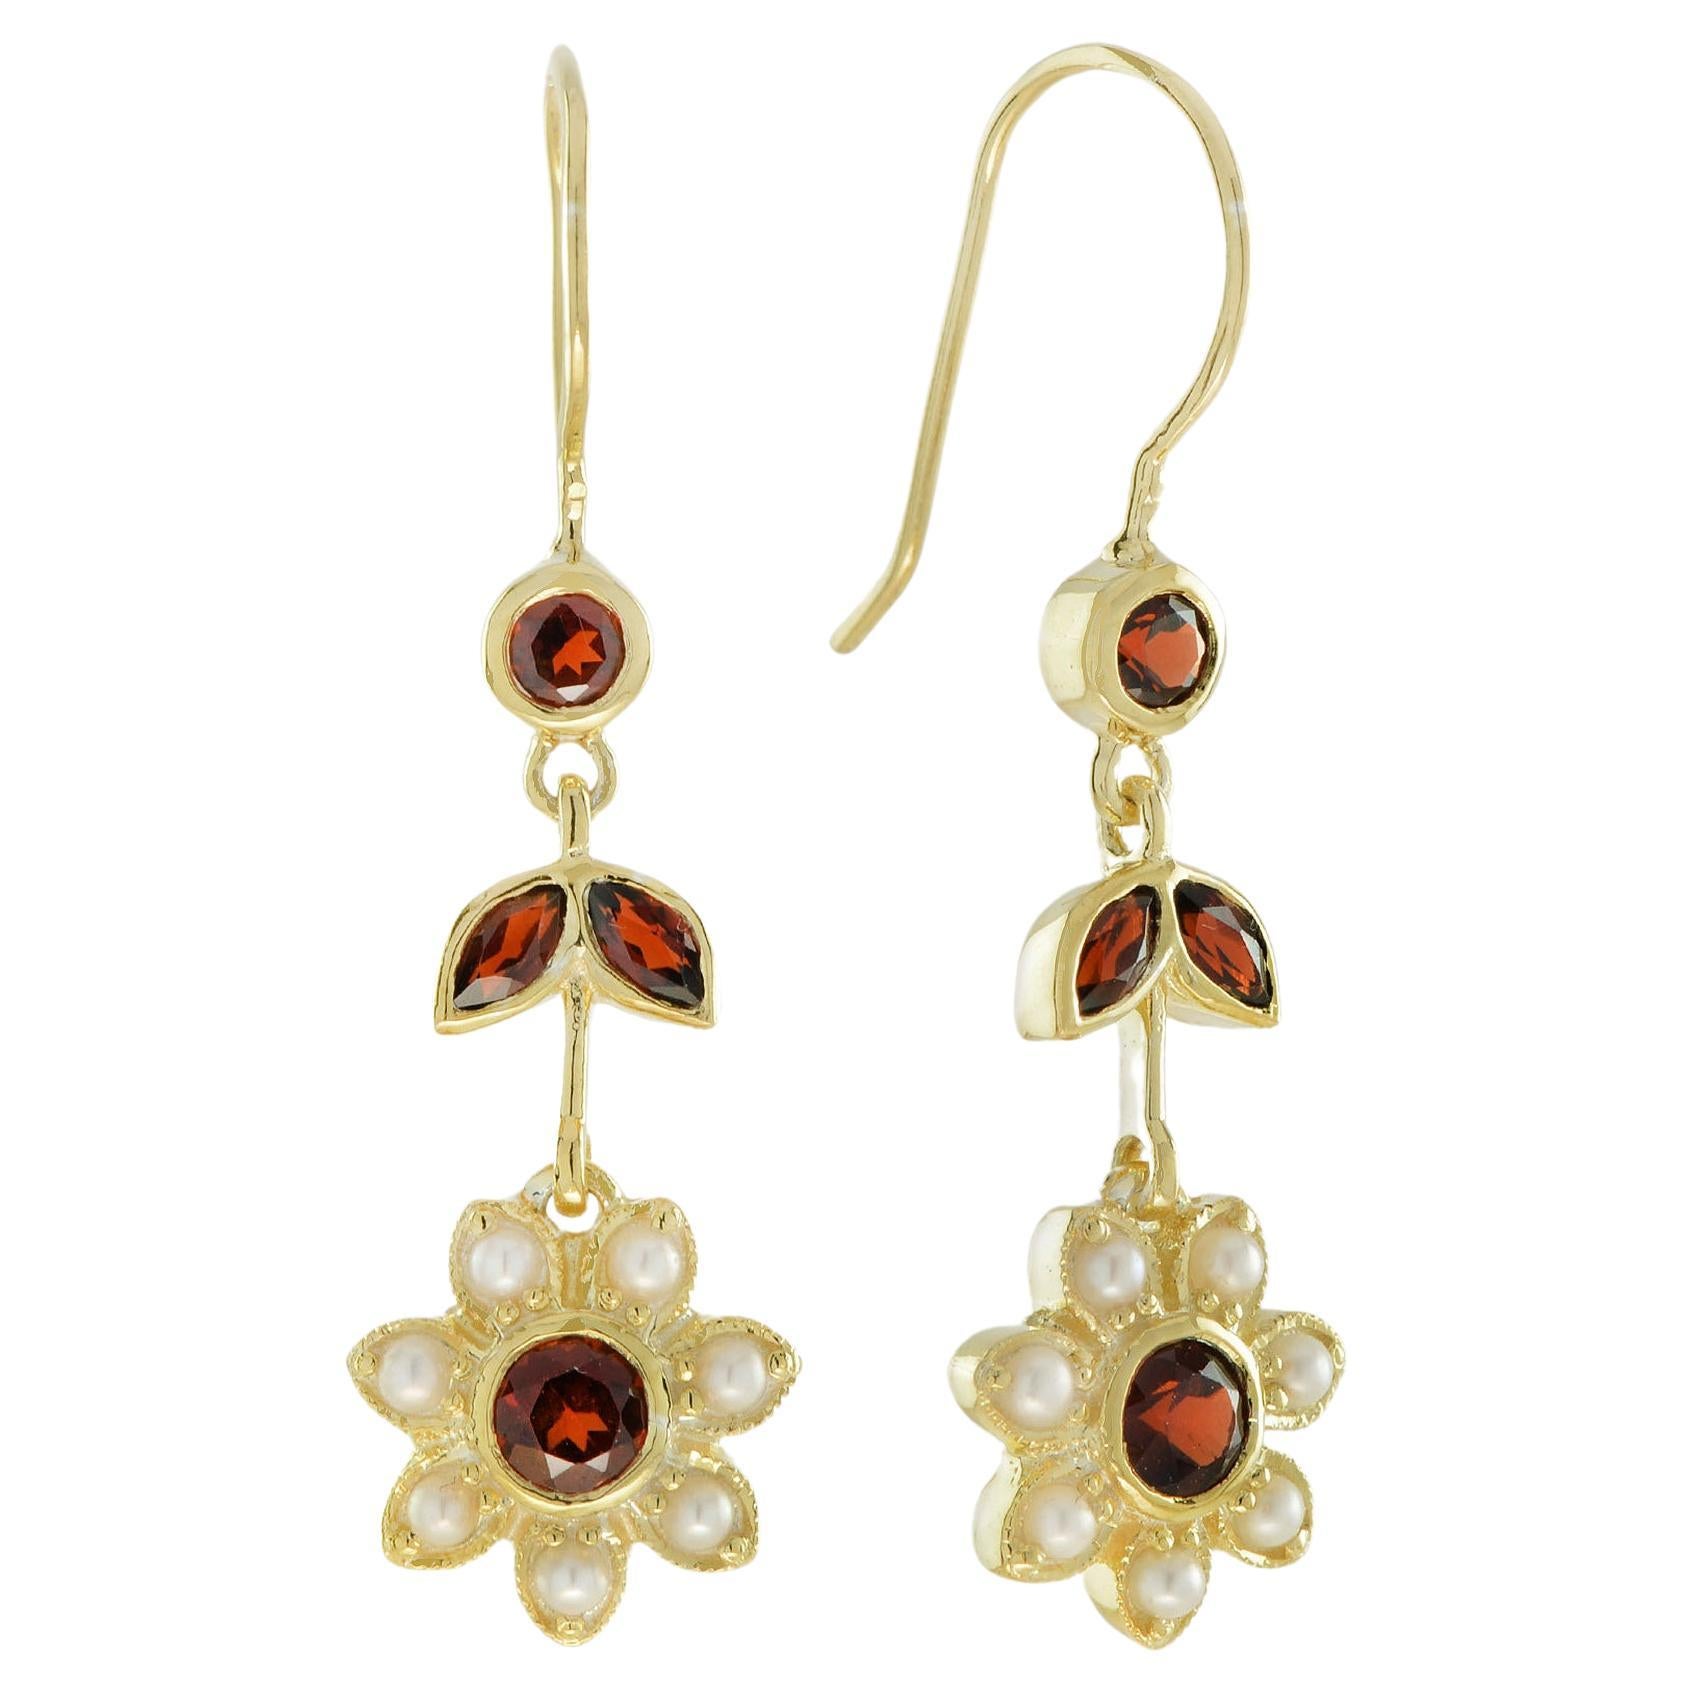 Natural Garnet and Pearl Vintage Style Floral Dangle Earrings in Solid 9K Gold